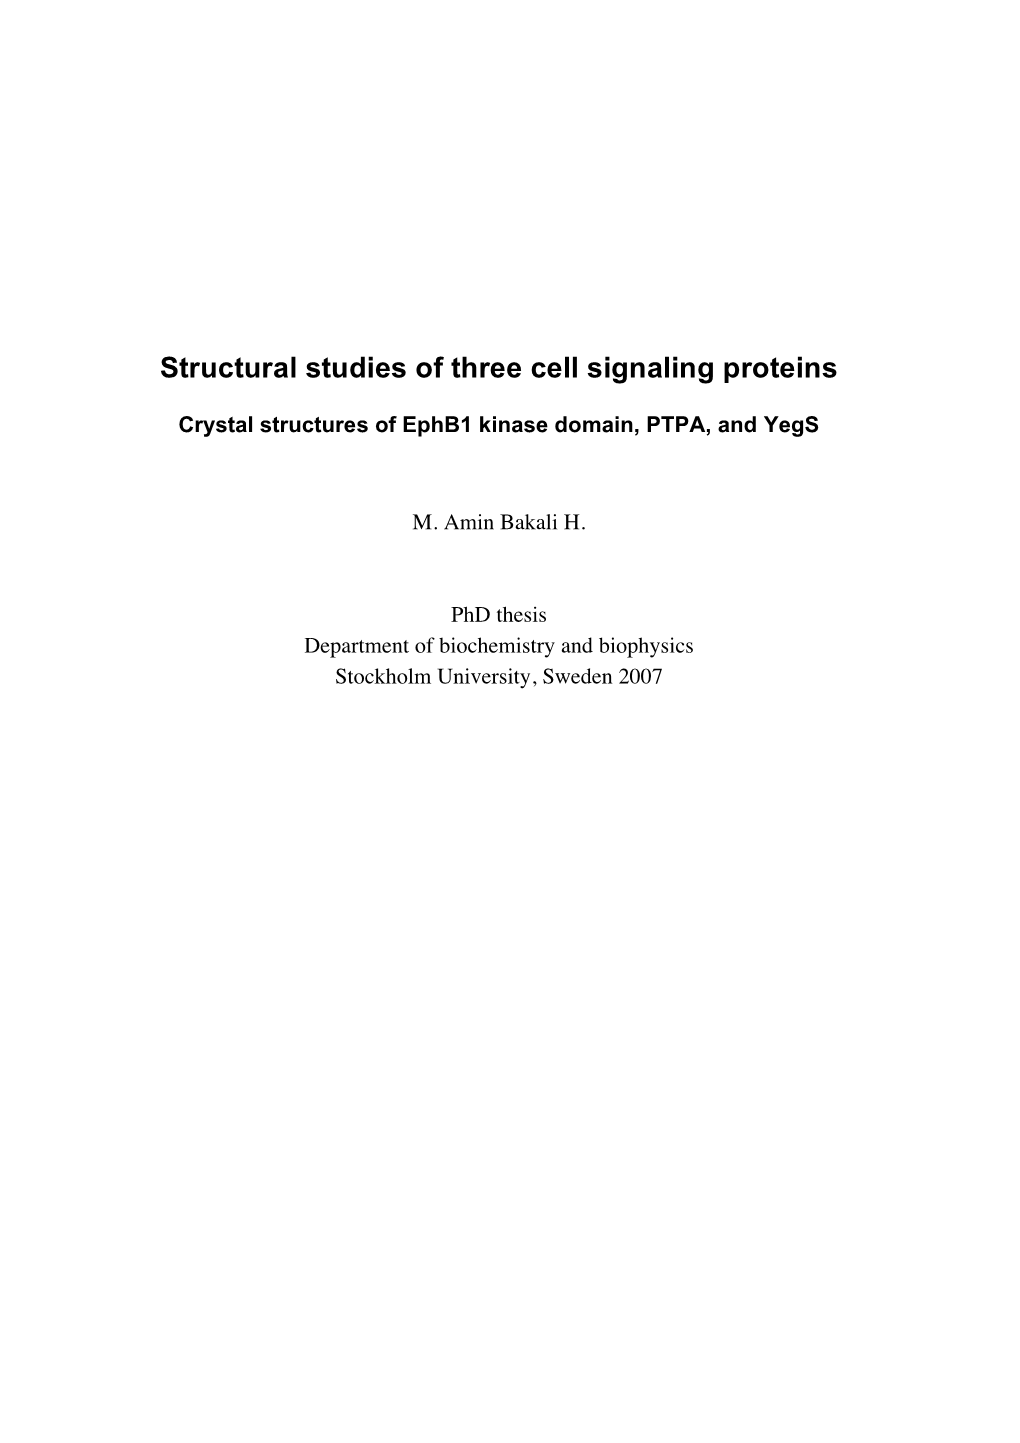 Structural Studies of Three Cell Signaling Proteins